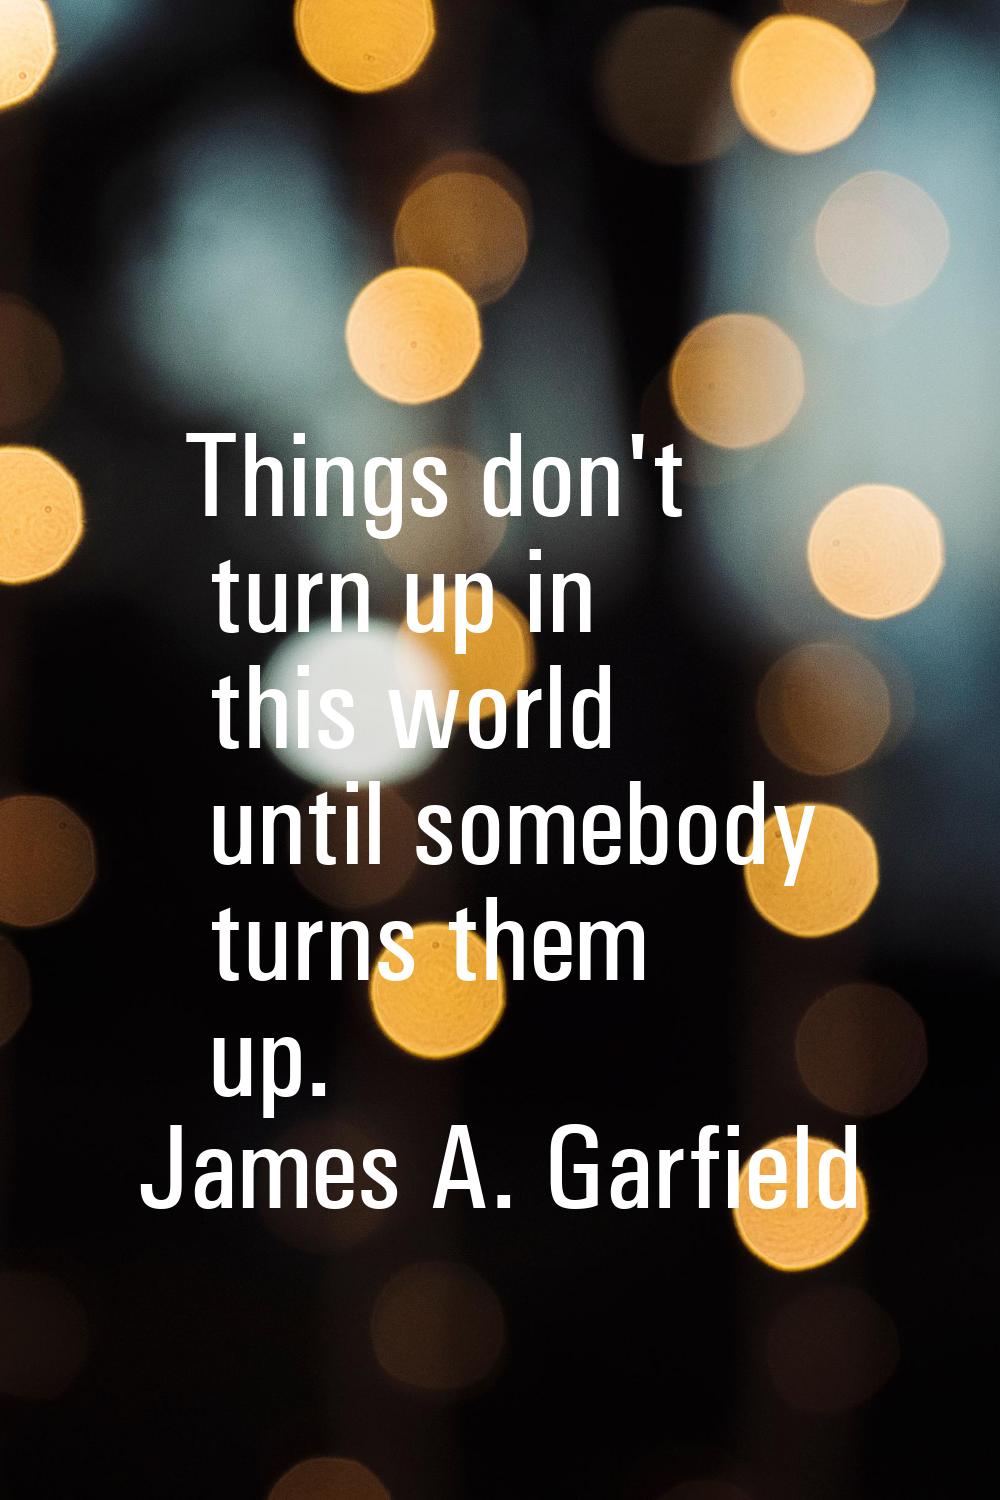 Things don't turn up in this world until somebody turns them up.